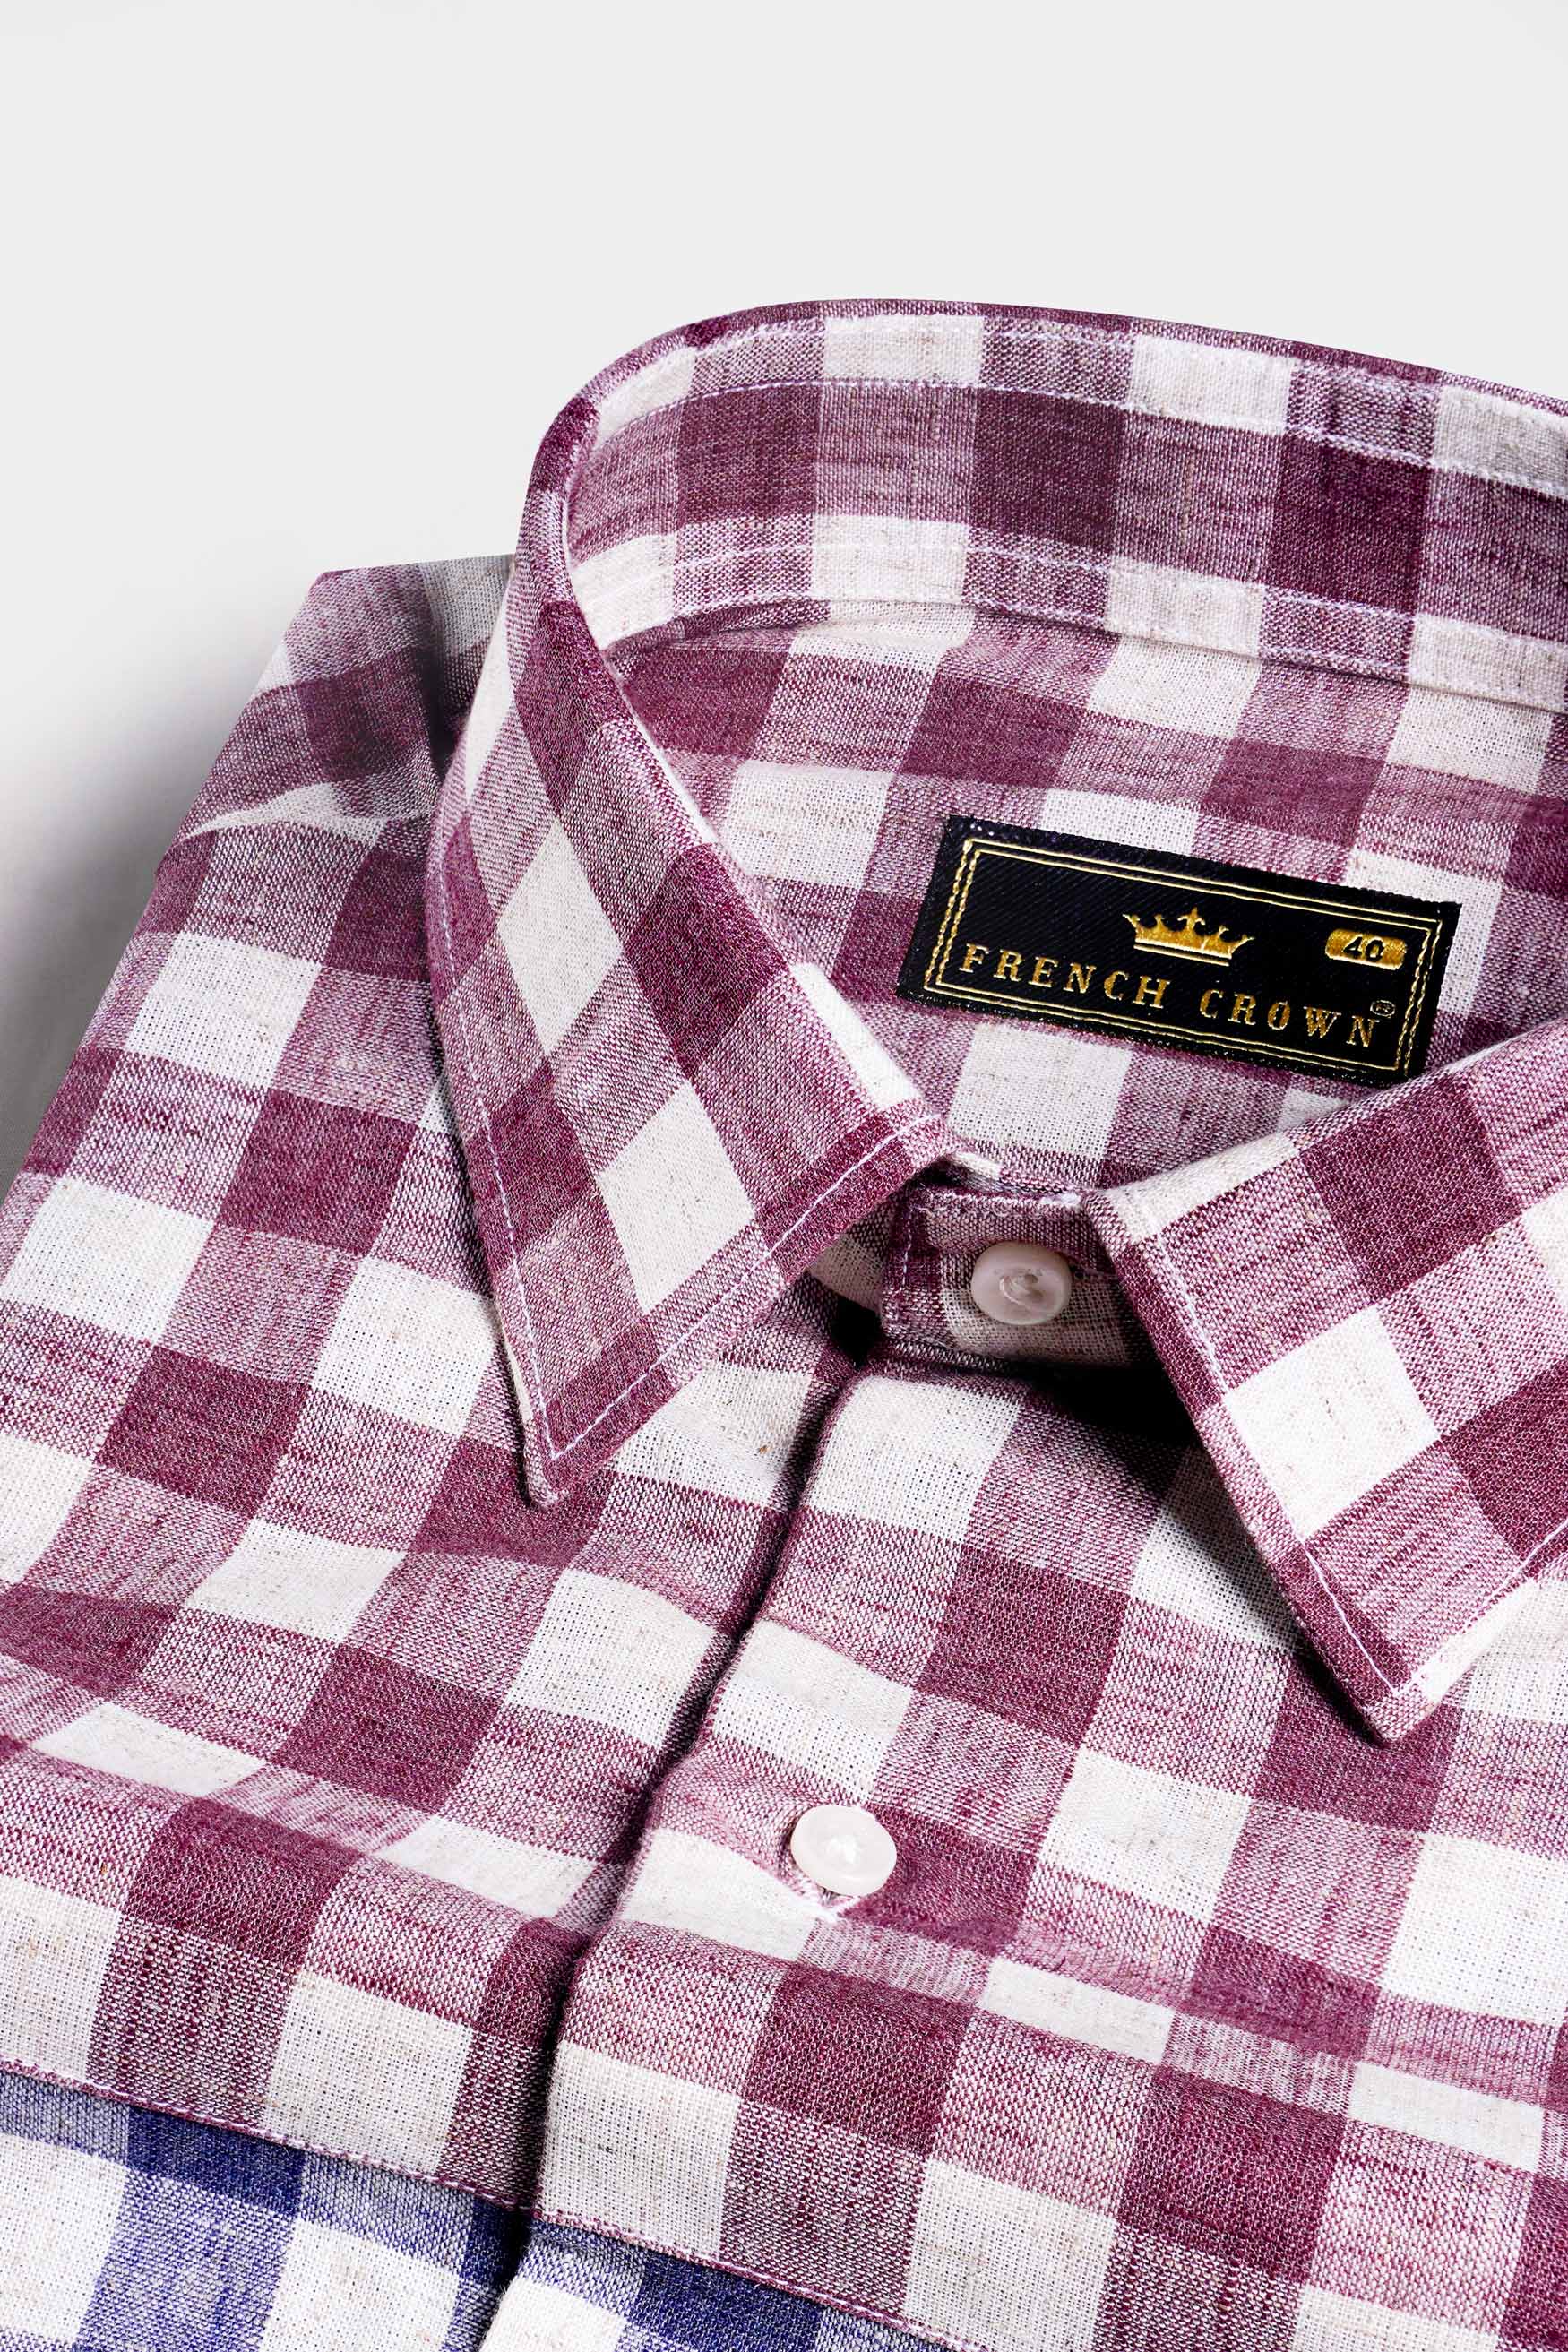 Rhino Blue with Muave Pink and White Plaid Luxurious linen Designer Shirt